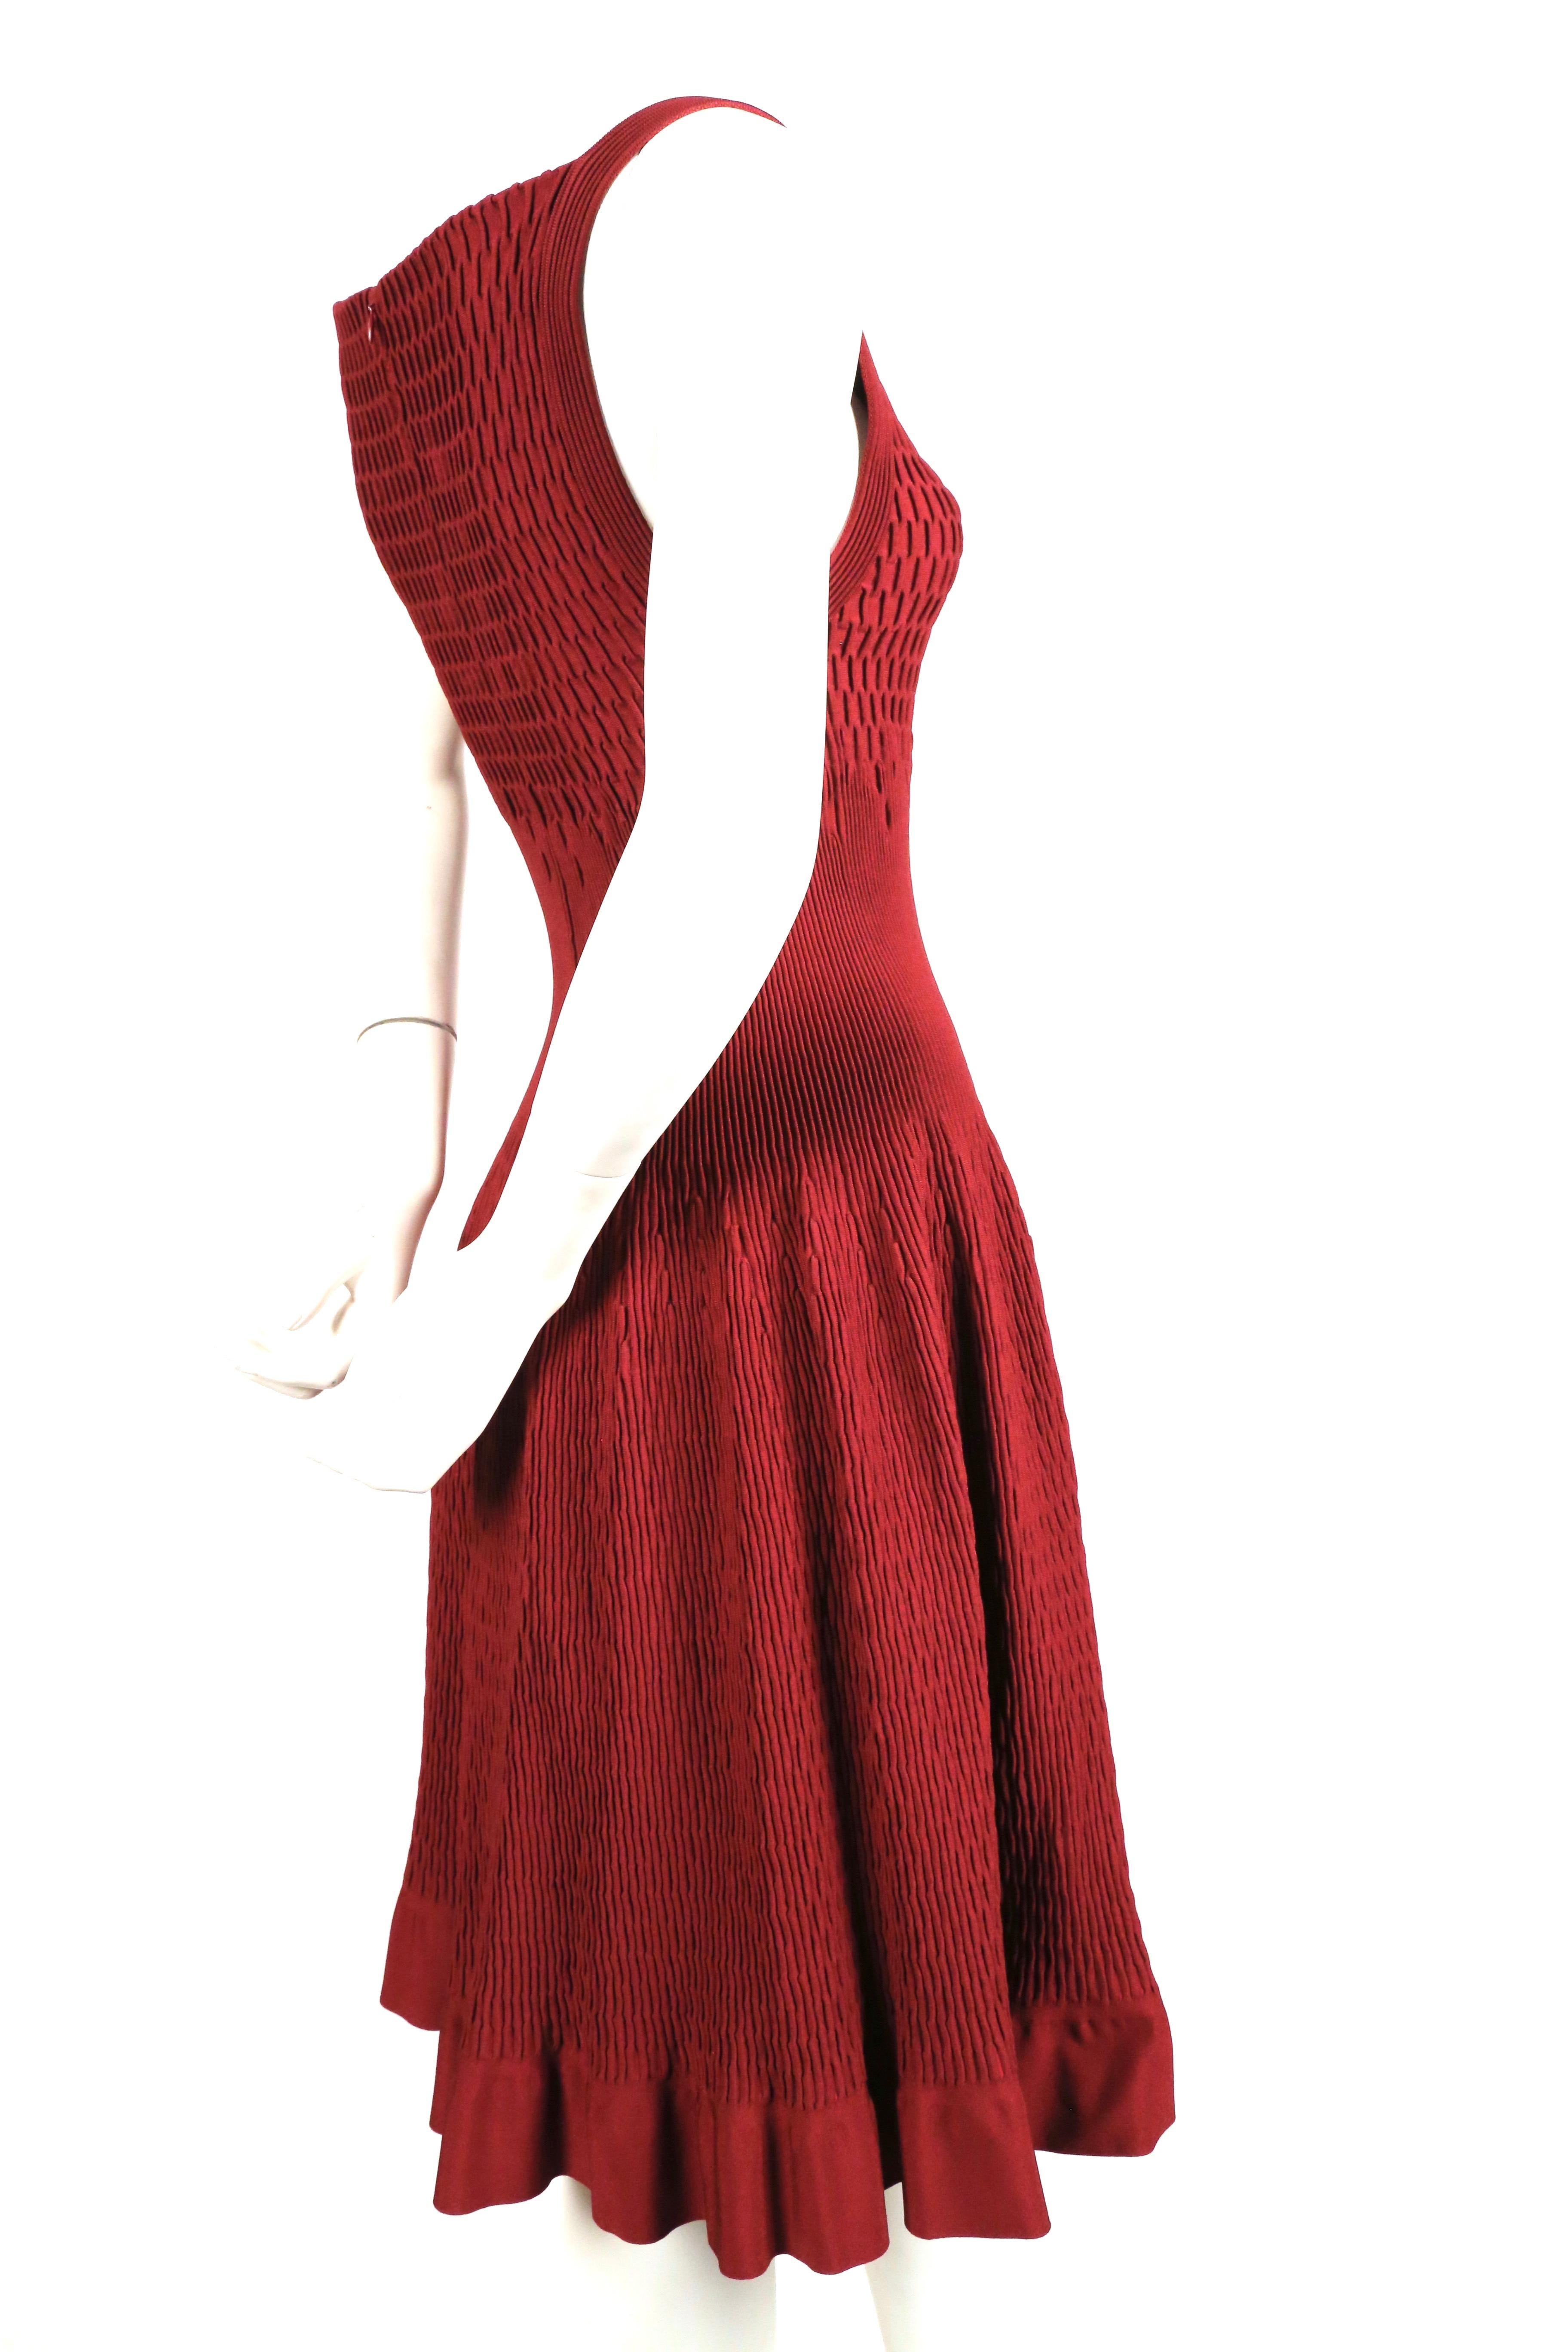 Bordeaux knit dress with intricate plisse woven pleats from Azzedine Alaia. New with tags. French size 40 however runs small and best fits a FR 36 or 38. Approximate measurements (unstretched): bust 24